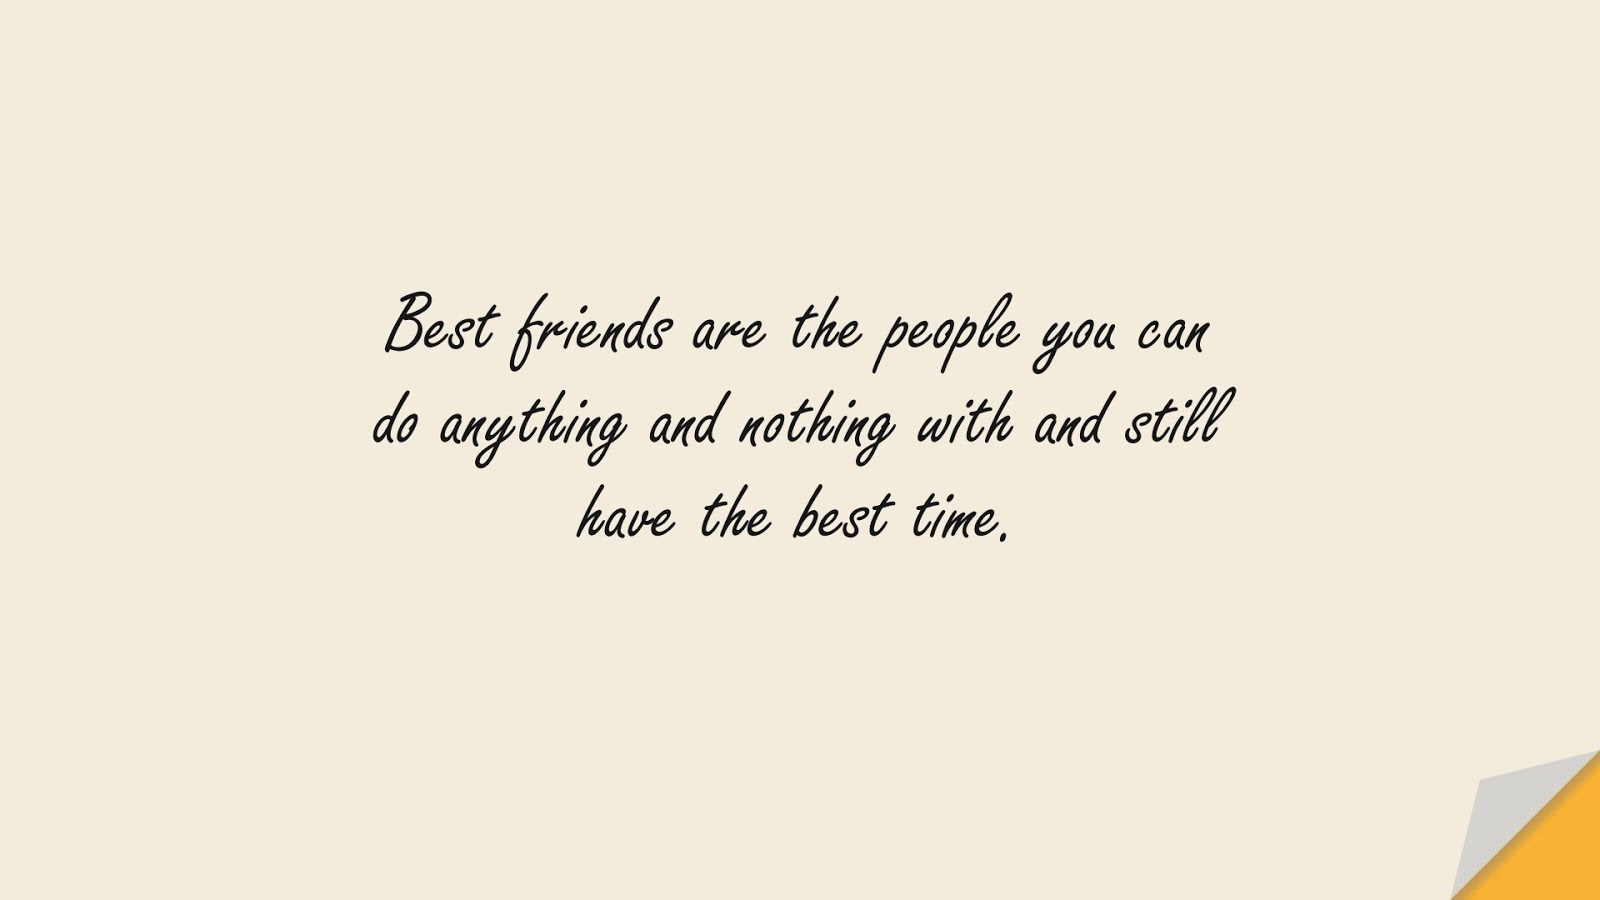 Best friends are the people you can do anything and nothing with and still have the best time.FALSE